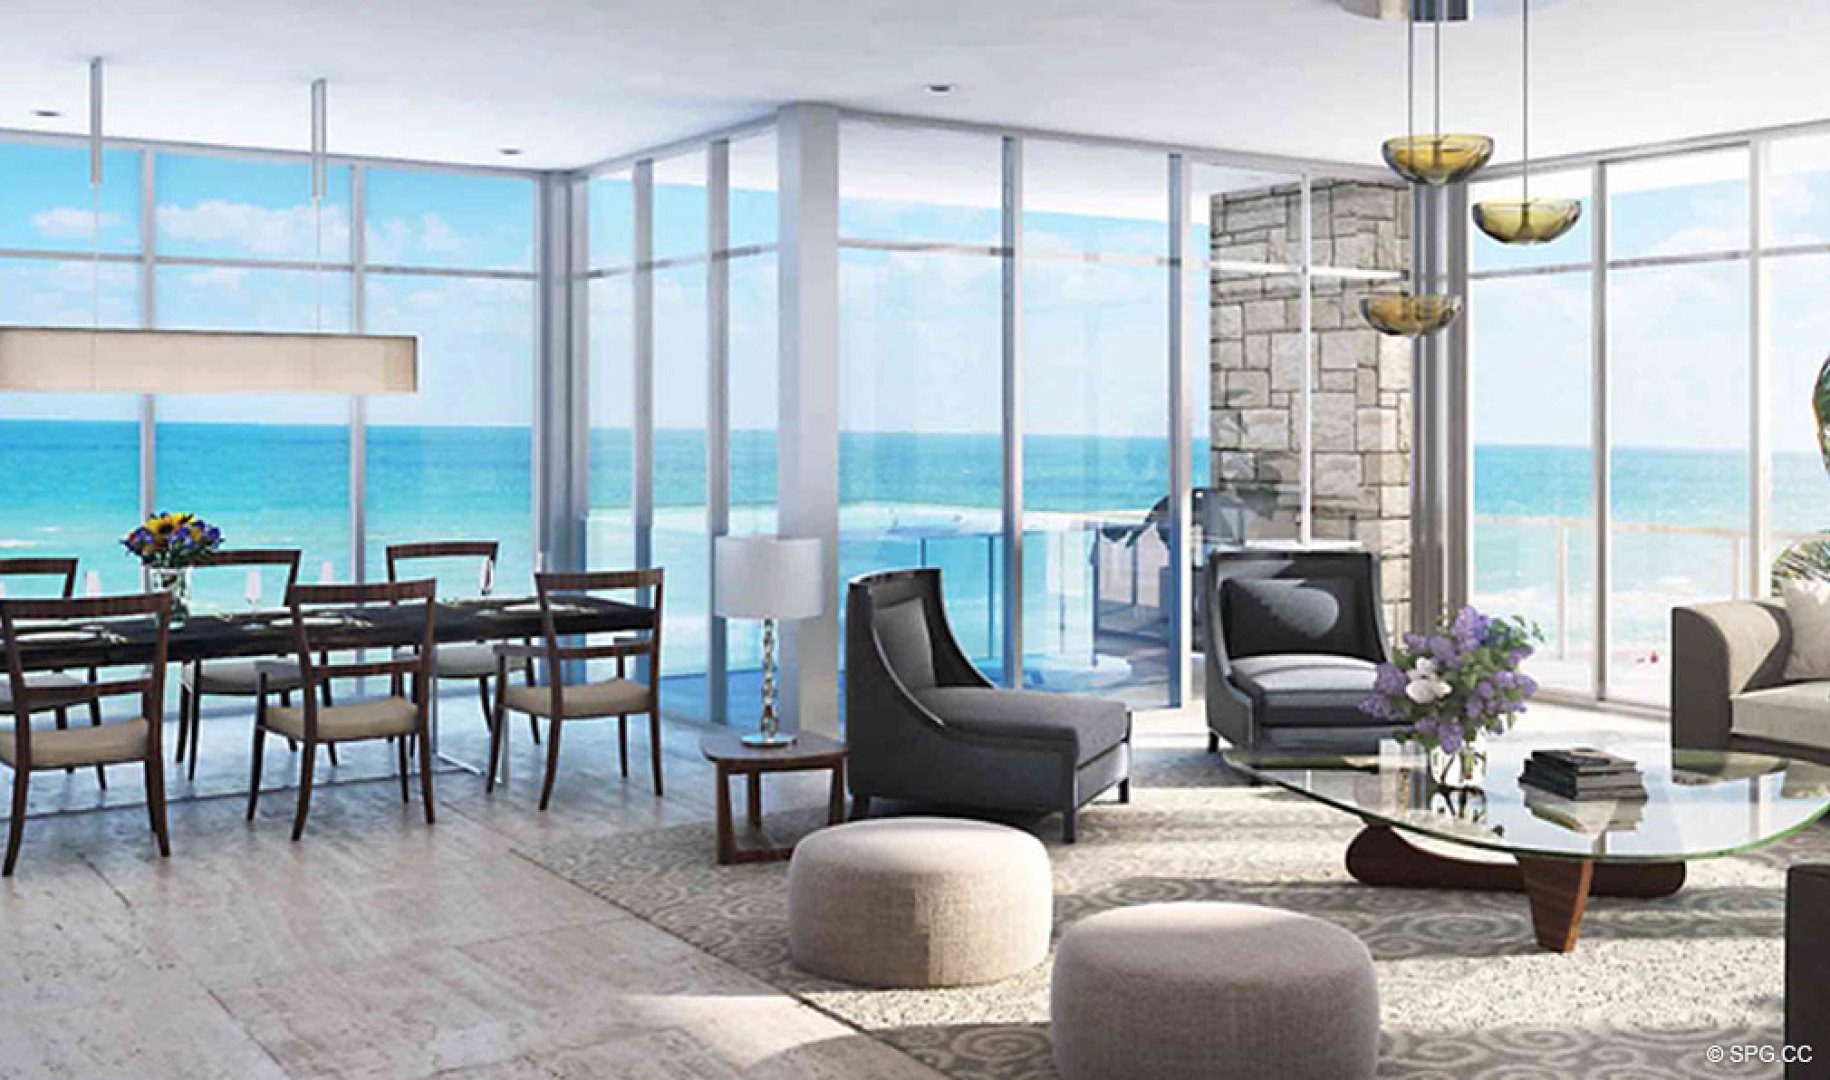 Spacious Interiors with Floor to Ceiling Glass at Sage Beach, Luxury Oceanfront Condos in Hollywood Beach Florida 33019